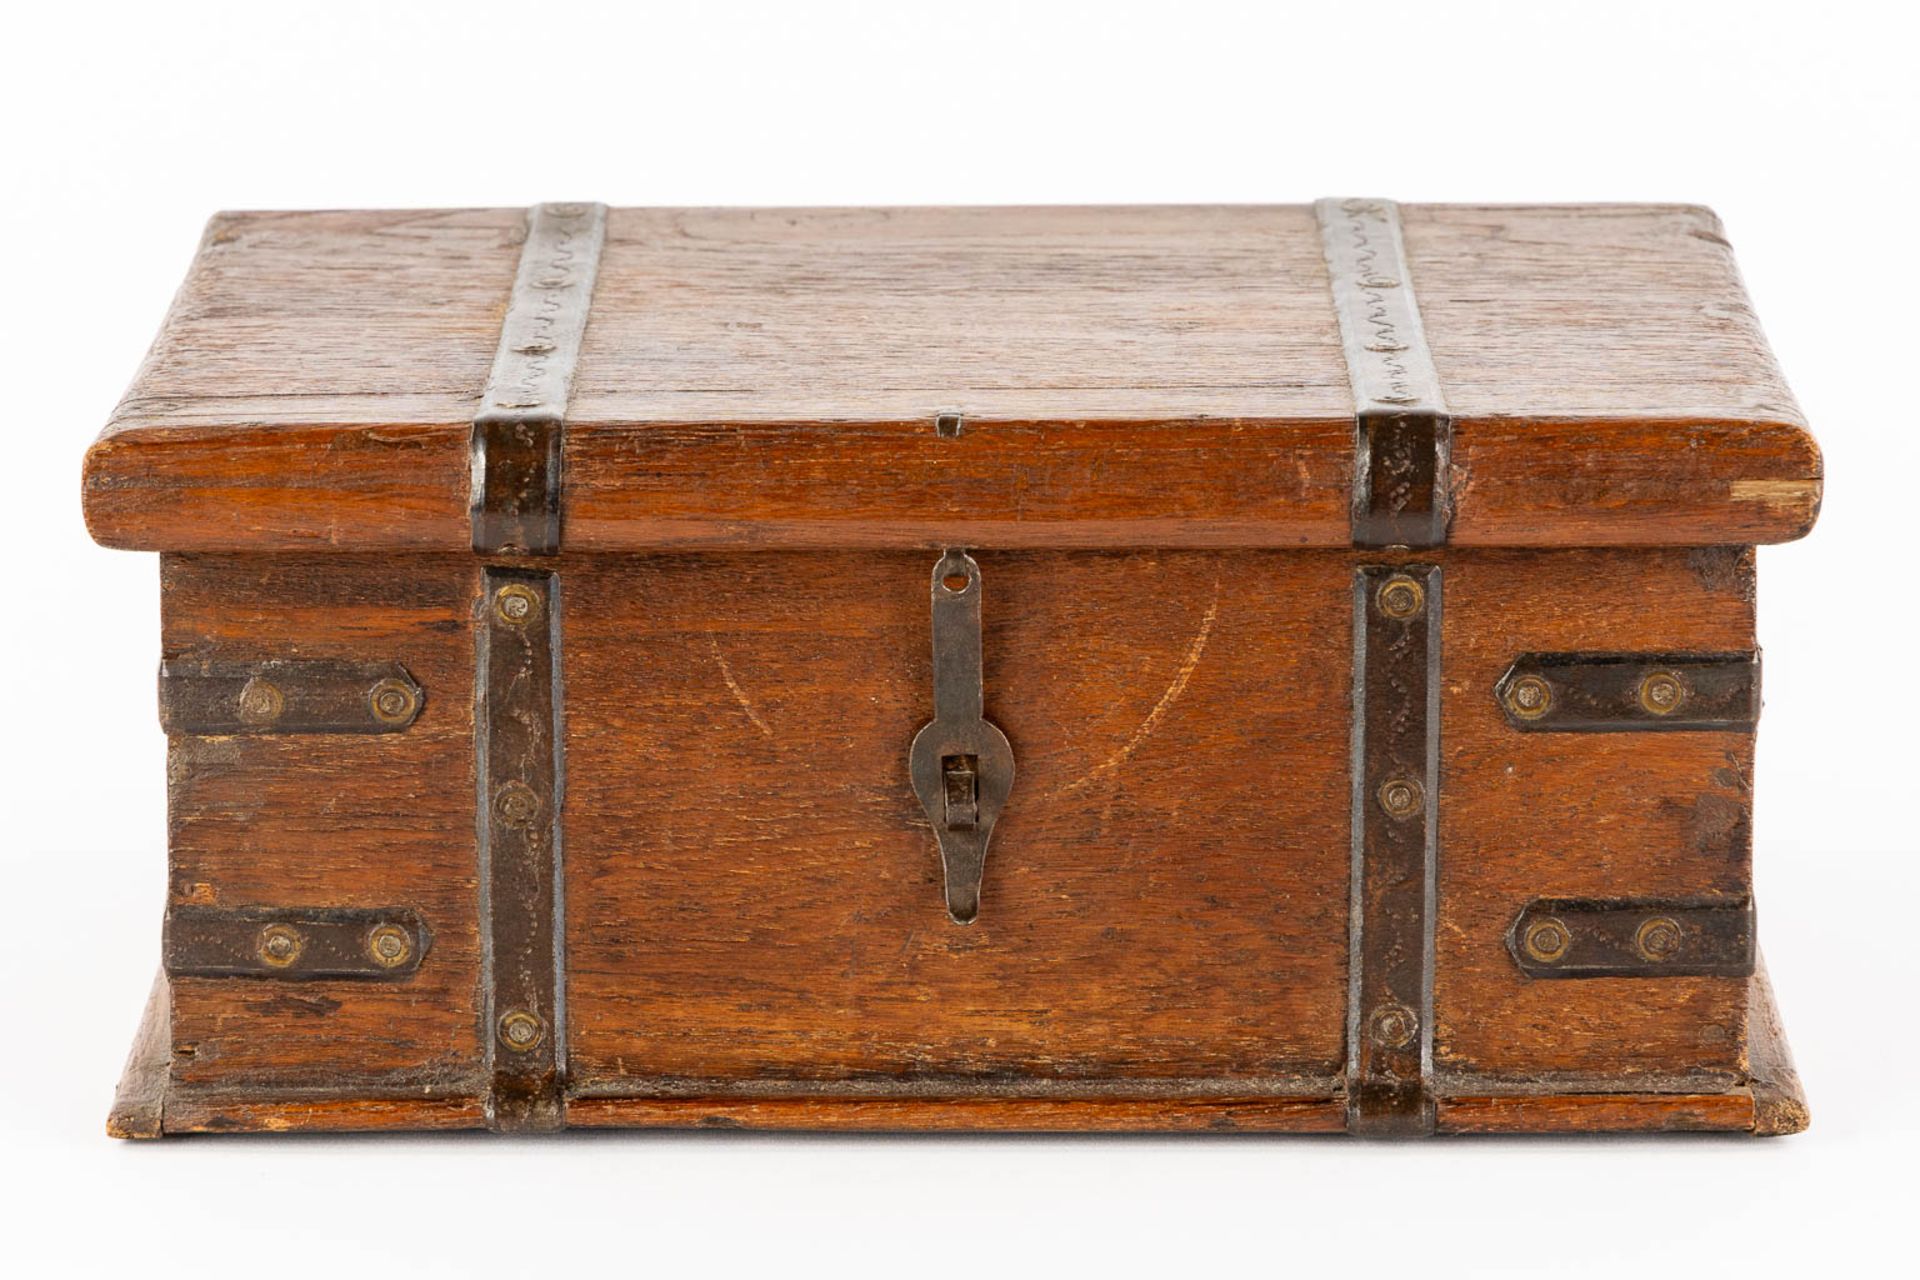 An antique money box or storage chest, oak and wrought iron, 19th C. (L:23 x W:31 x H:13 cm) - Image 3 of 13